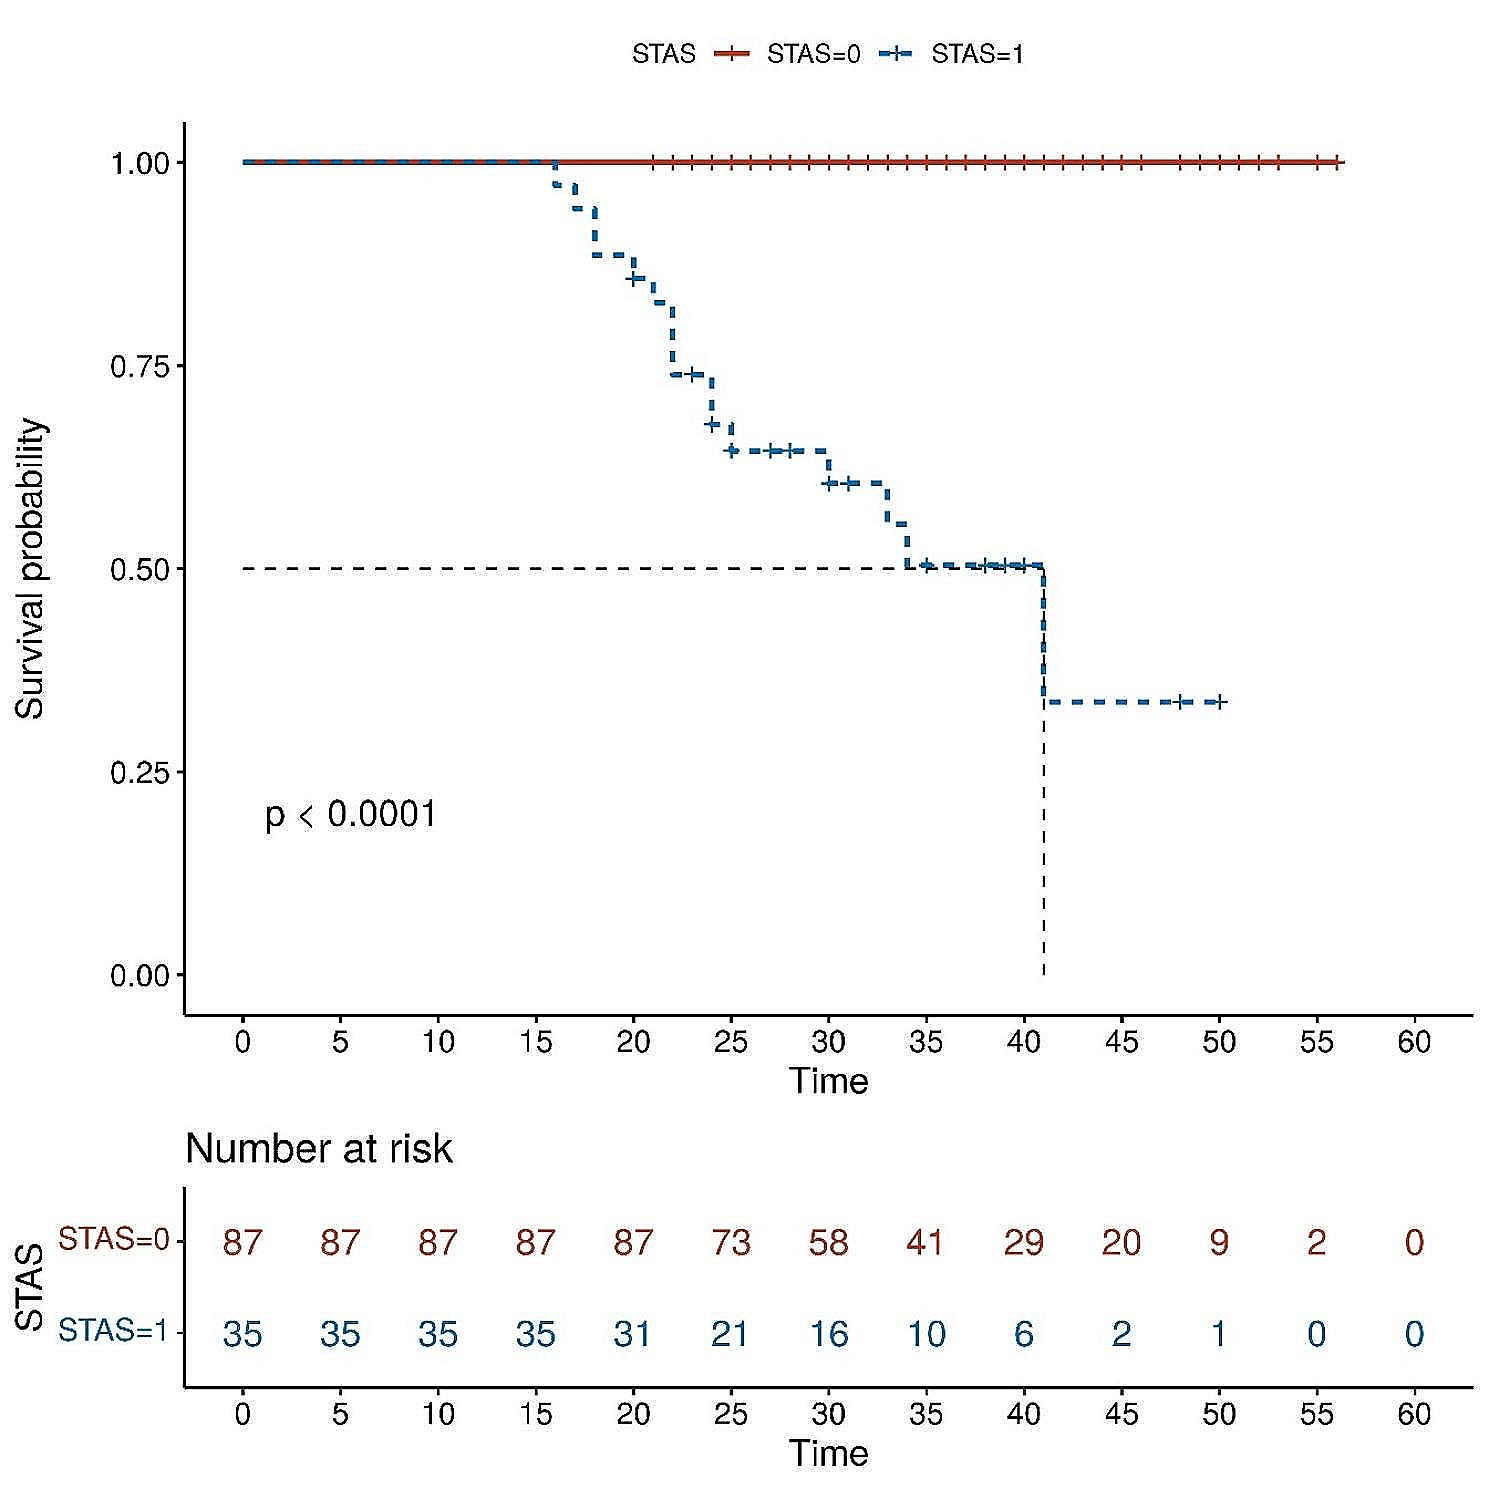 The effect of spread through air spaces on postoperative recurrence-free survival in patients with multiple primary lung cancers